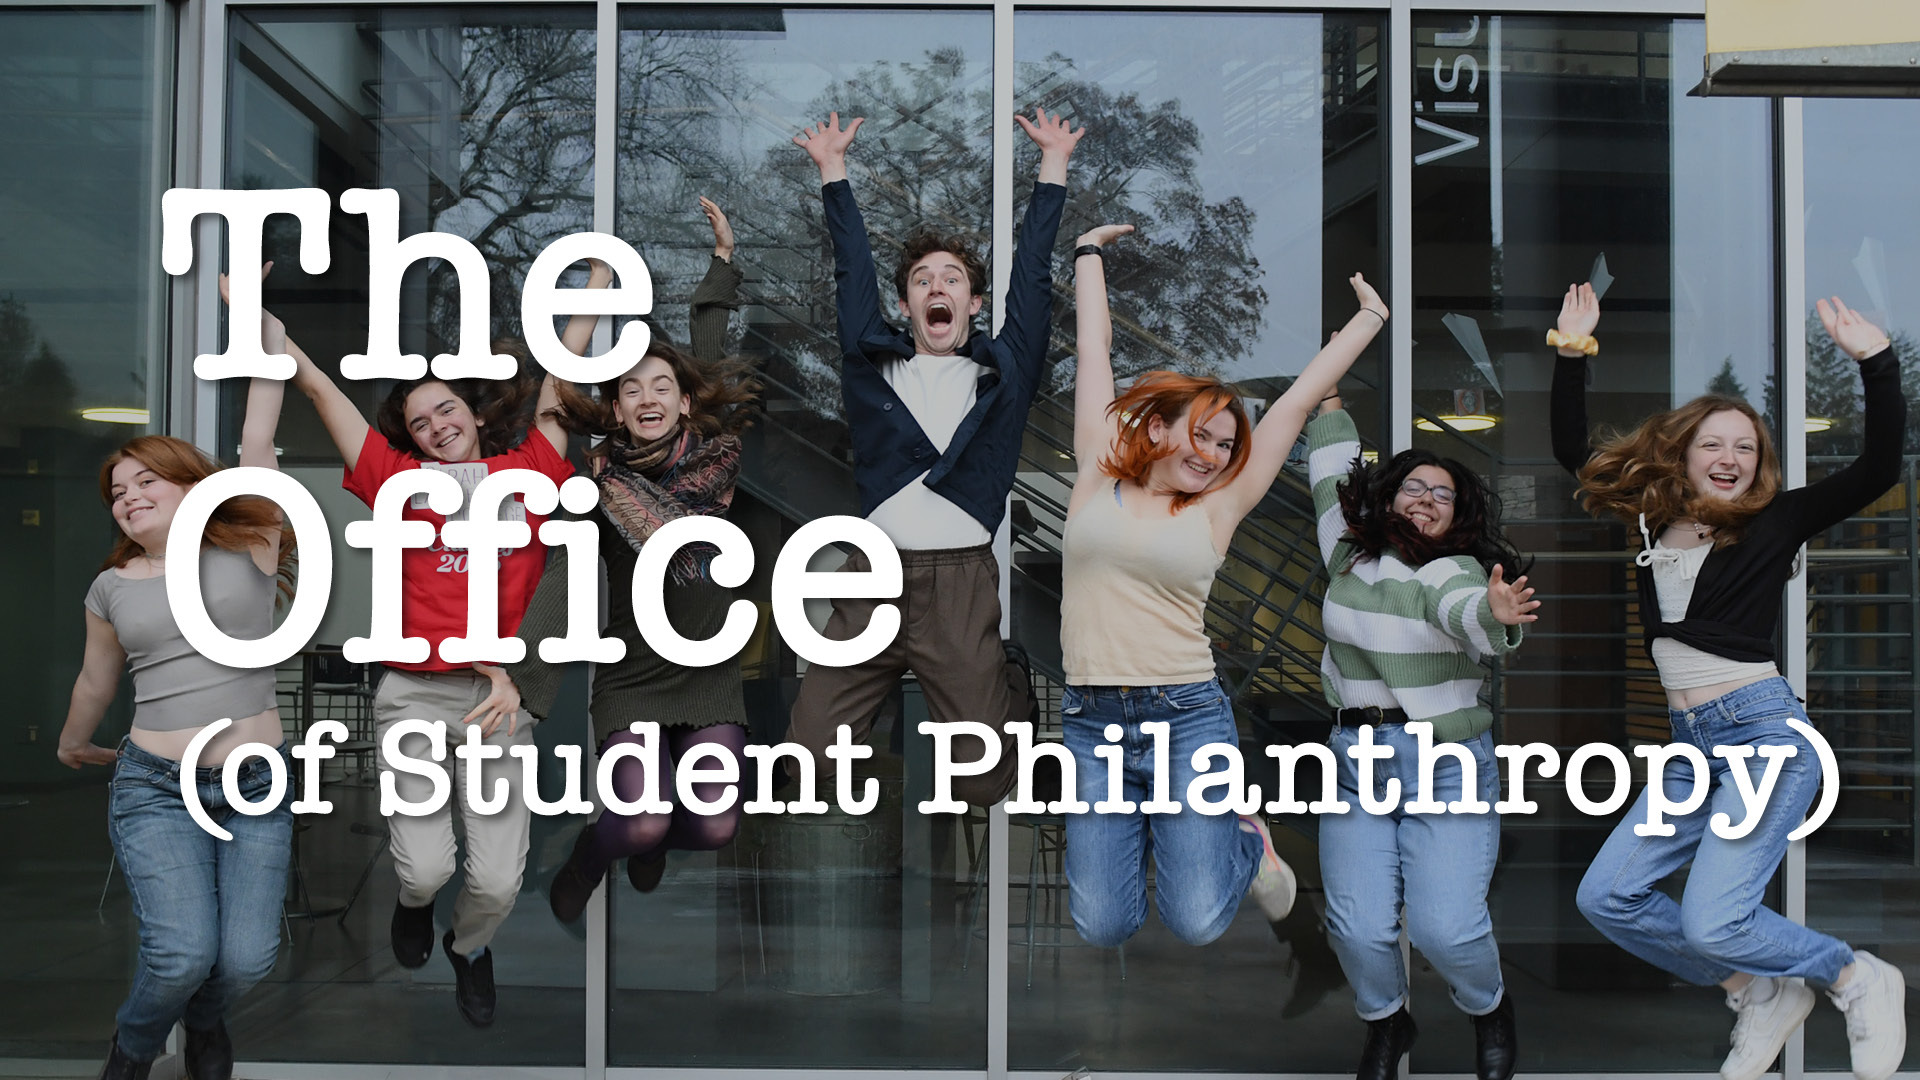 7 students jumping in the air with text The office of student philanthropy superimposed